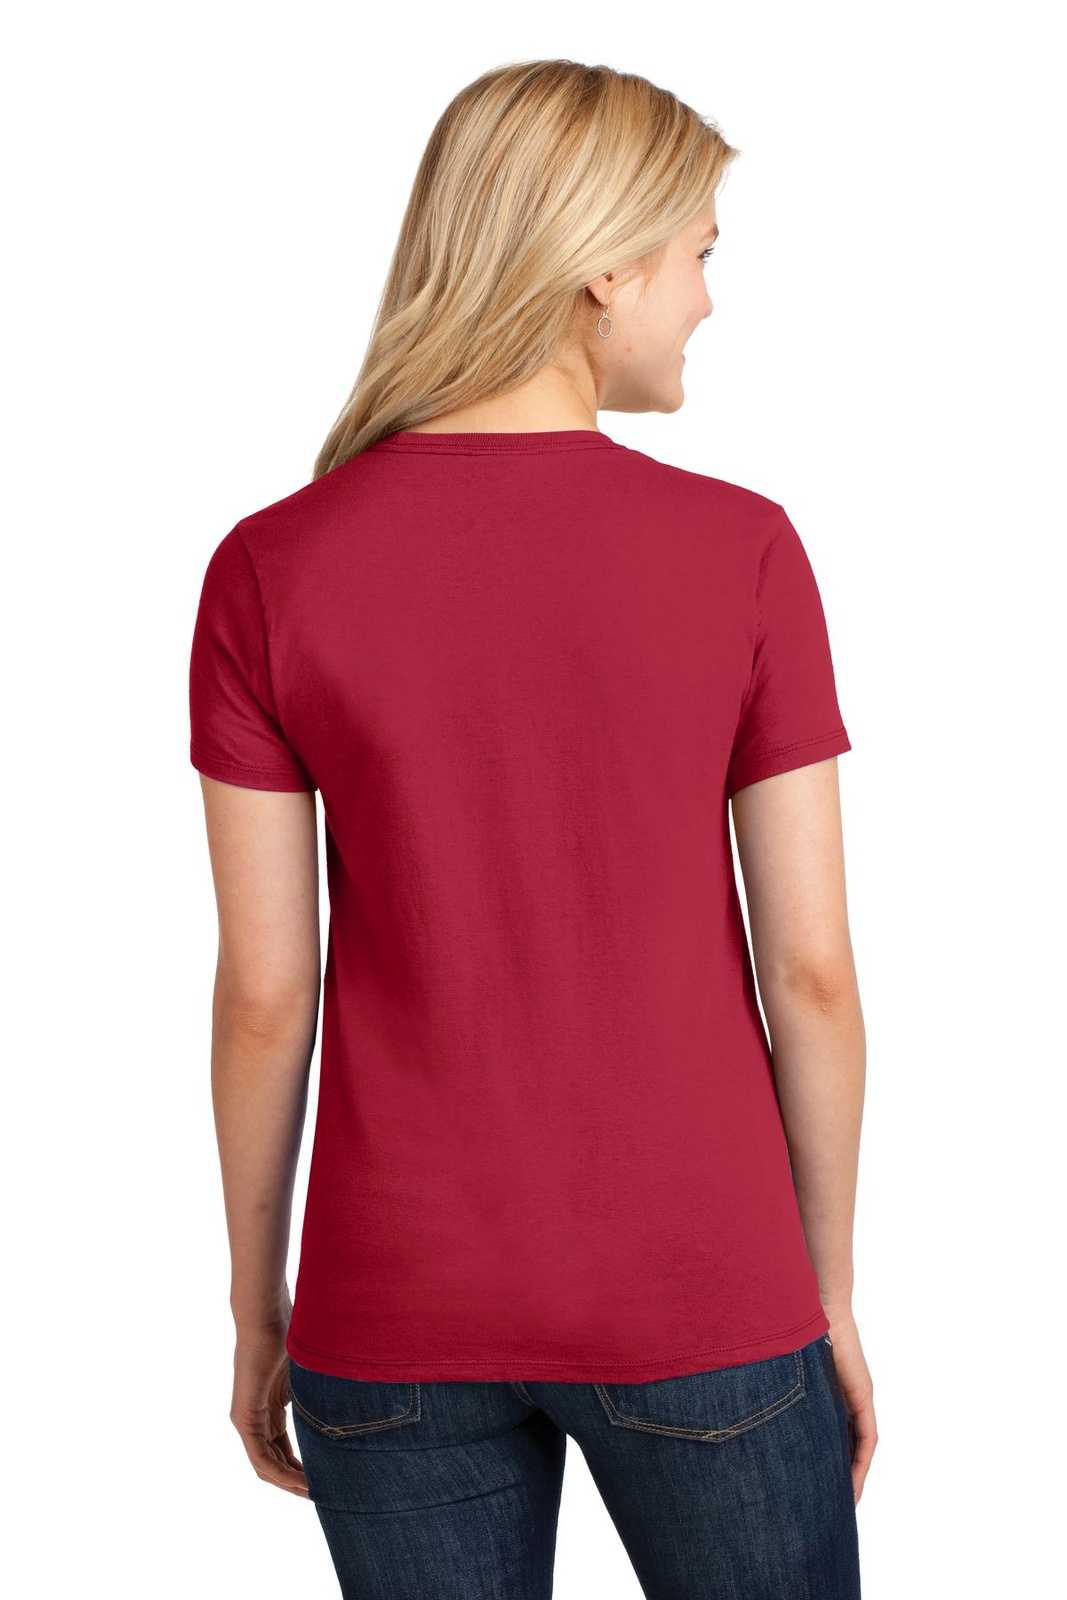 Port &amp; Company LPC54 Ladies Core Cotton Tee - Red - HIT a Double - 2